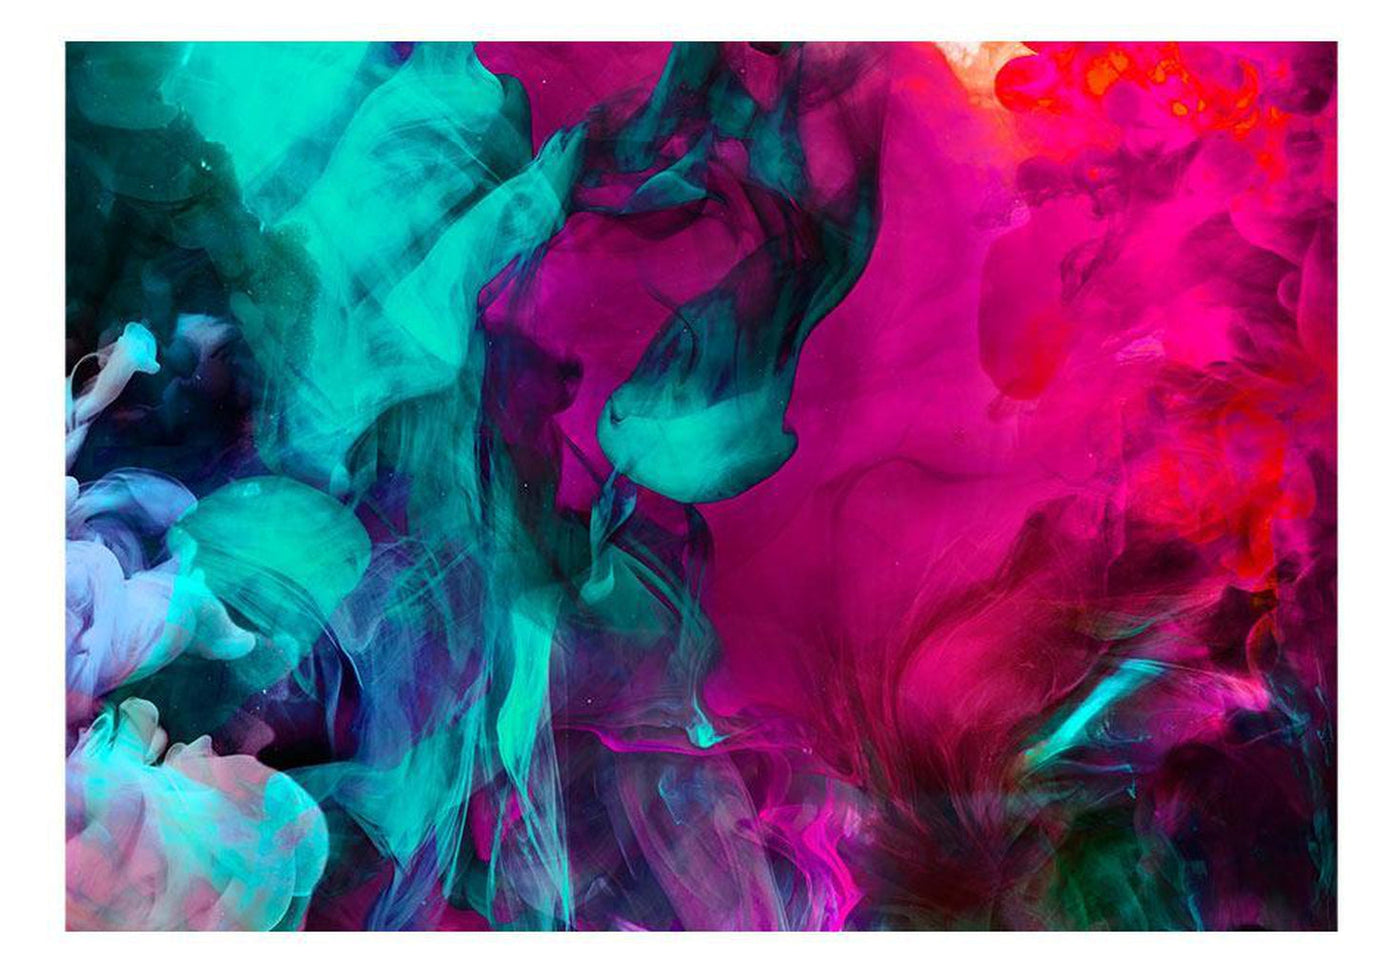 Wall mural - Color madness-TipTopHomeDecor